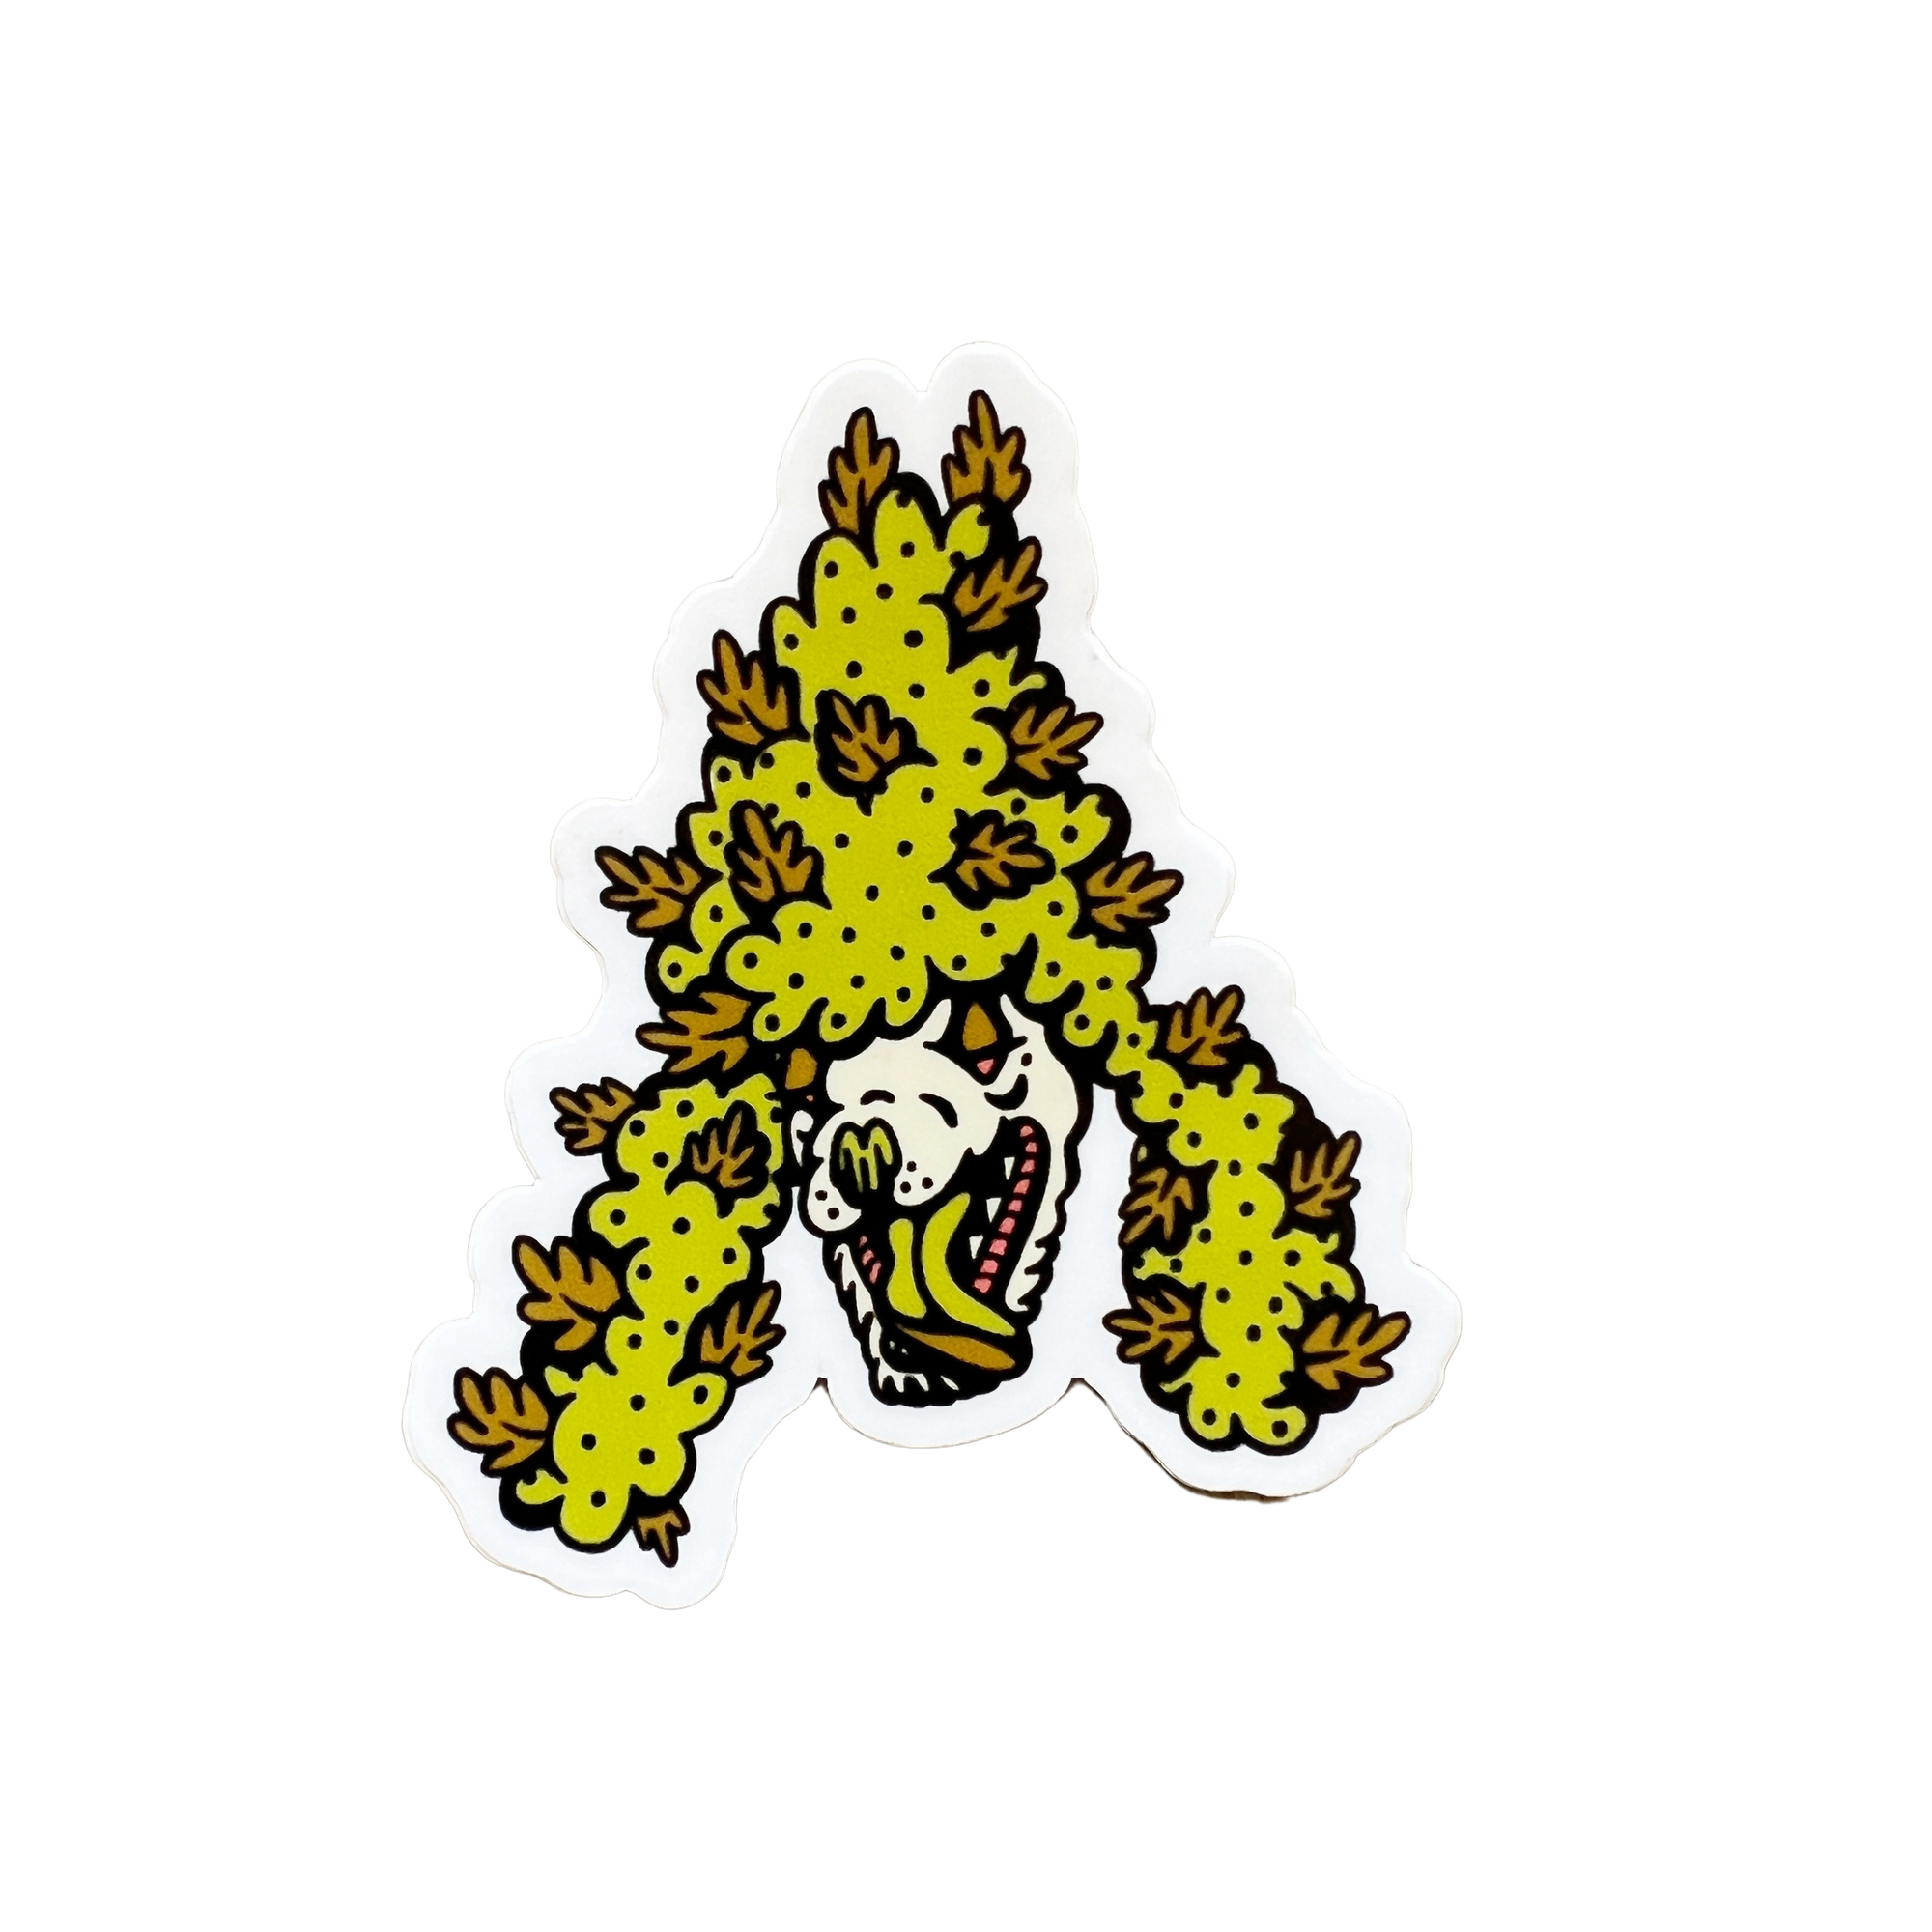 Weed Poodle Sticker No. 1